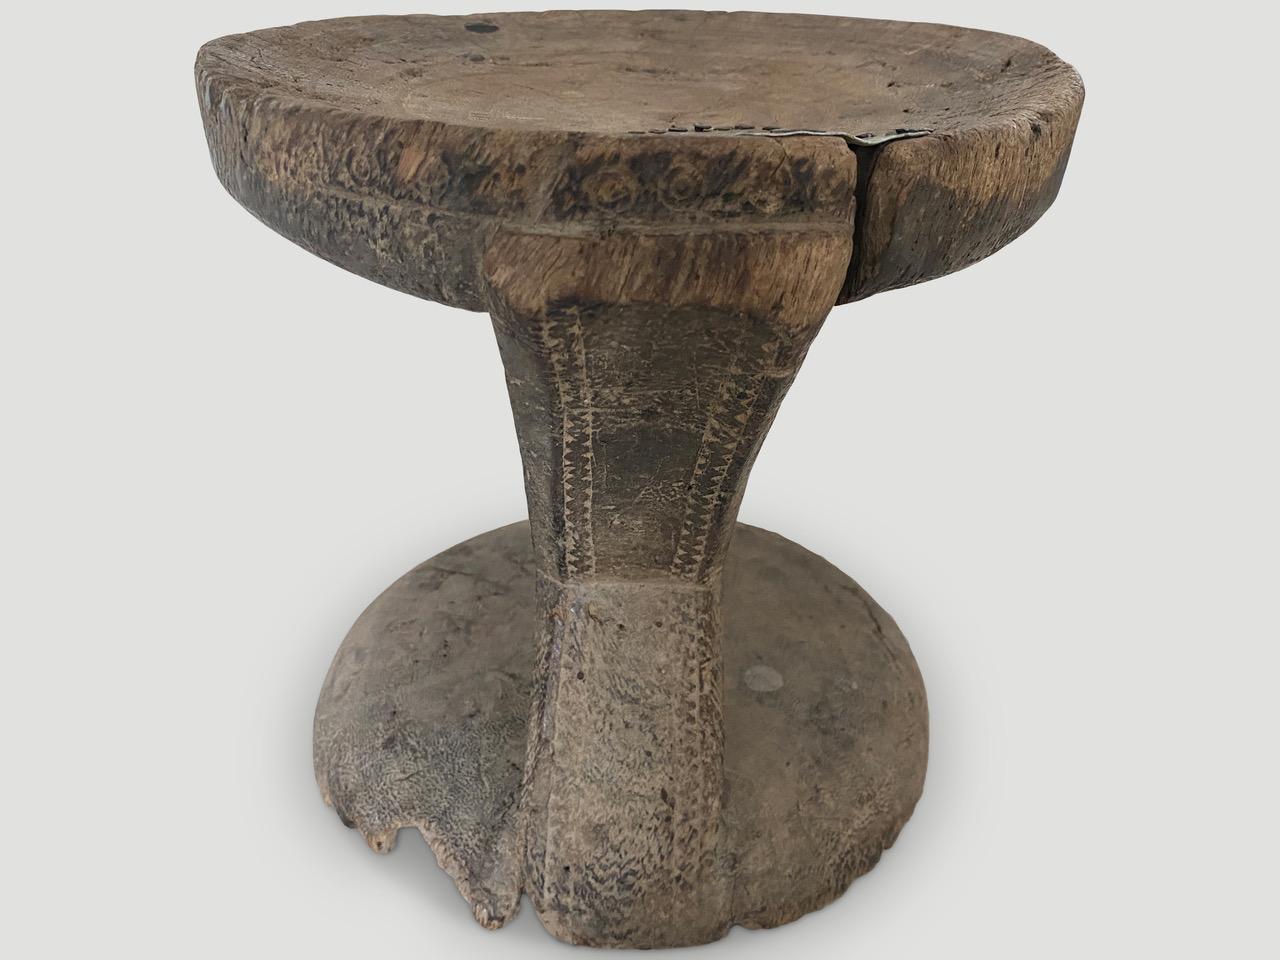 Tribal Andrianna Shamaris Antique African Side Table or Stool